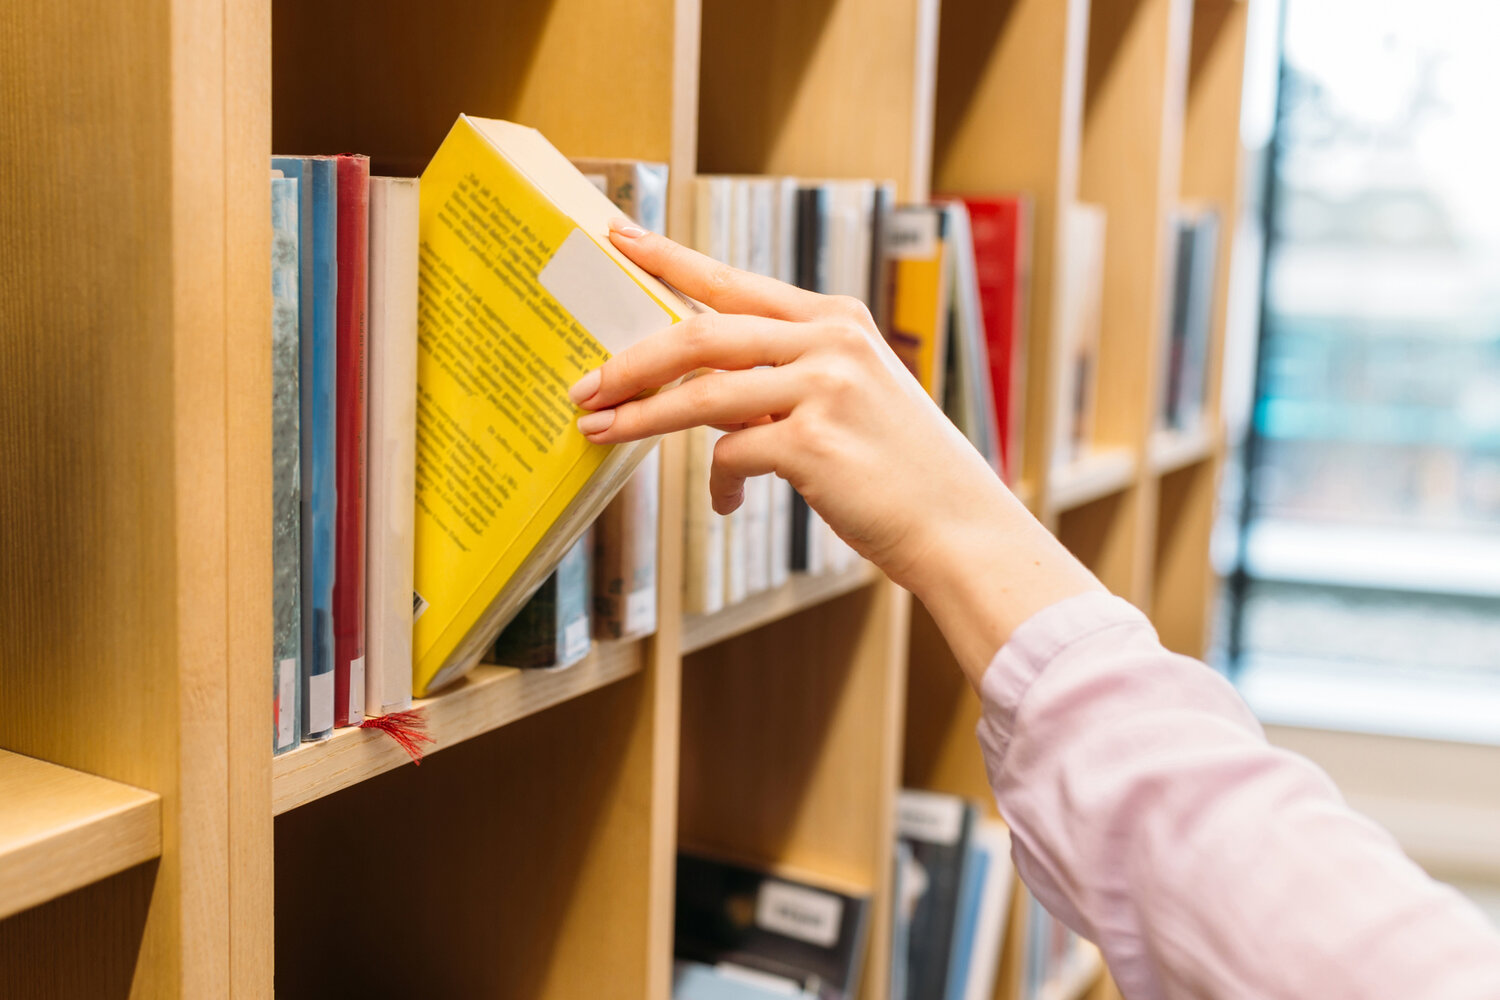 A hand picks up a book from a shelf in a library.